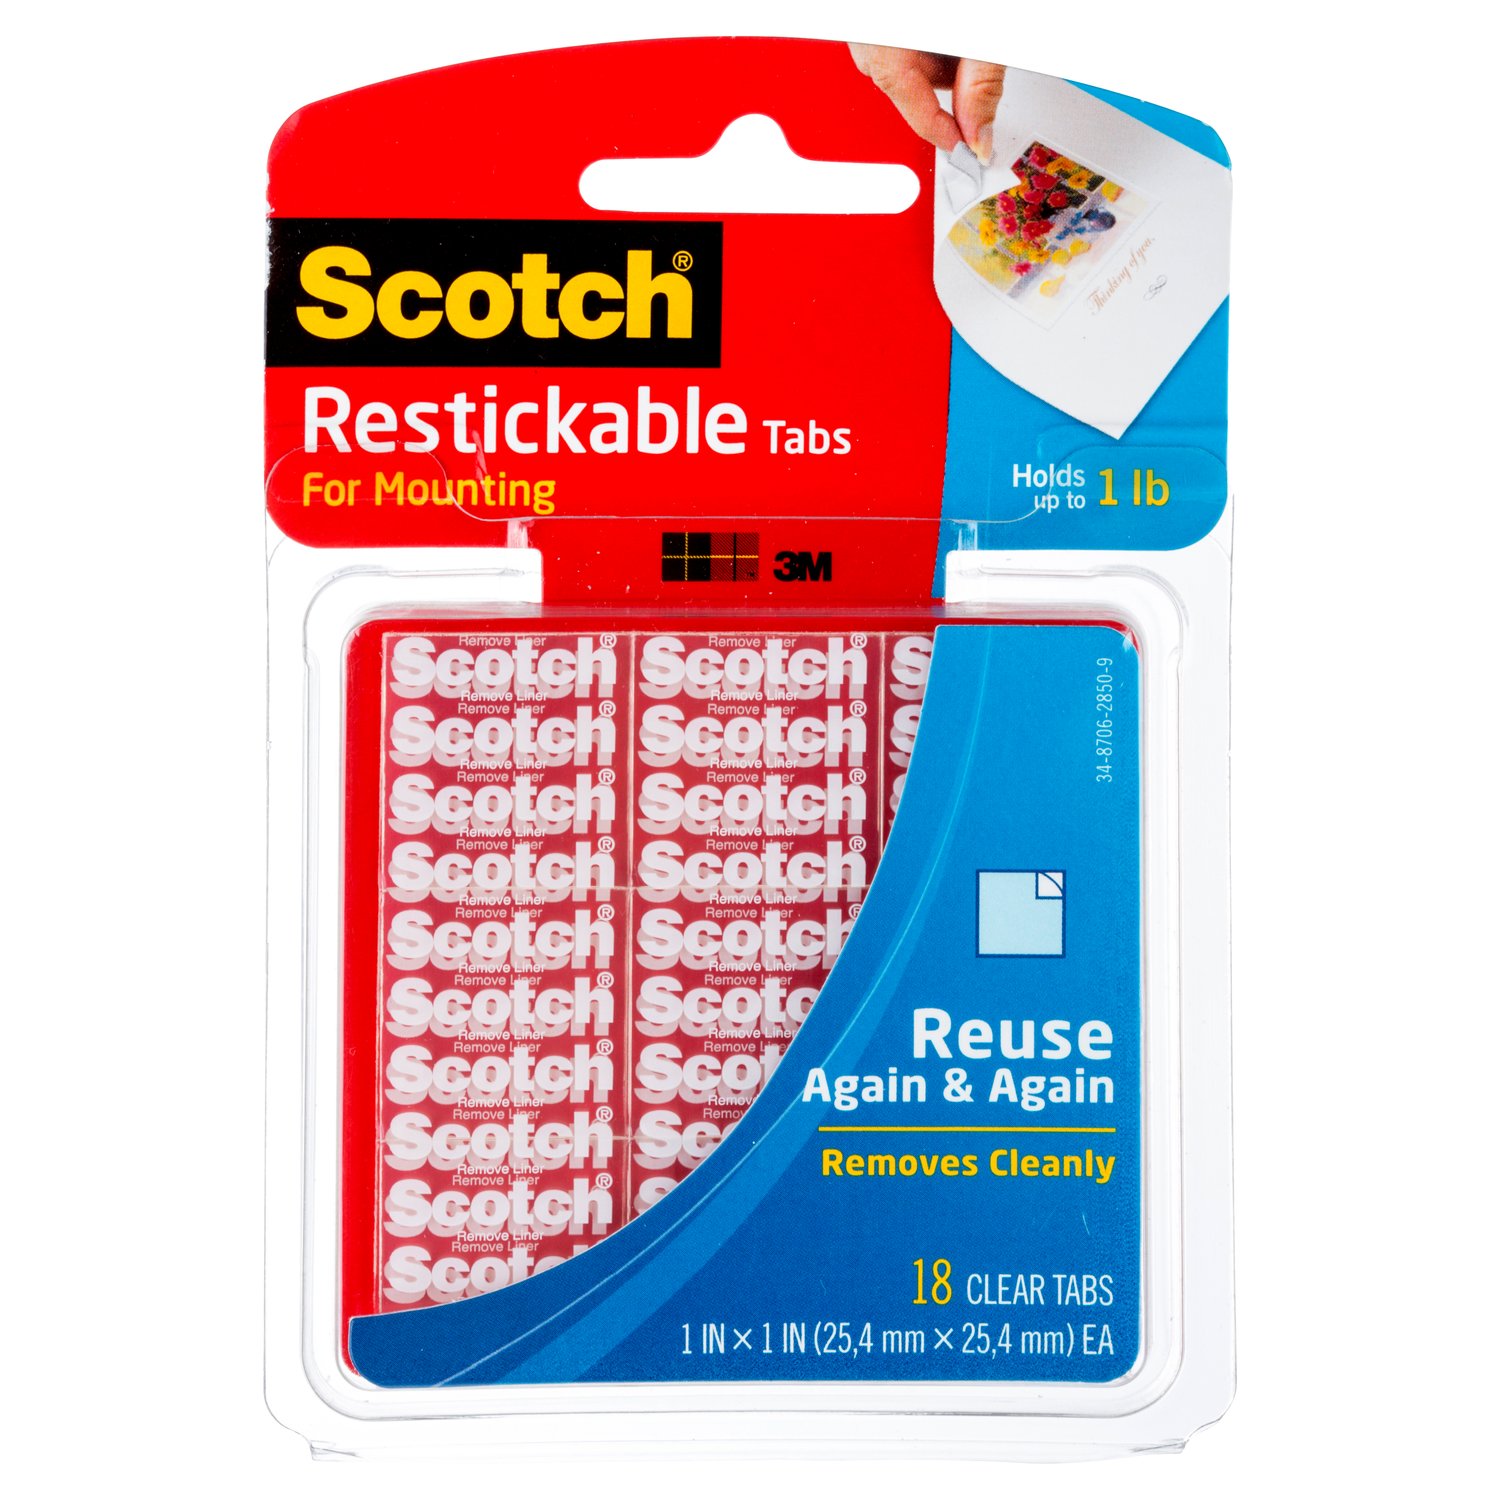 7000023922 - Scotch Restickable Tabs R100, 1 in x 1 in, 18 squares